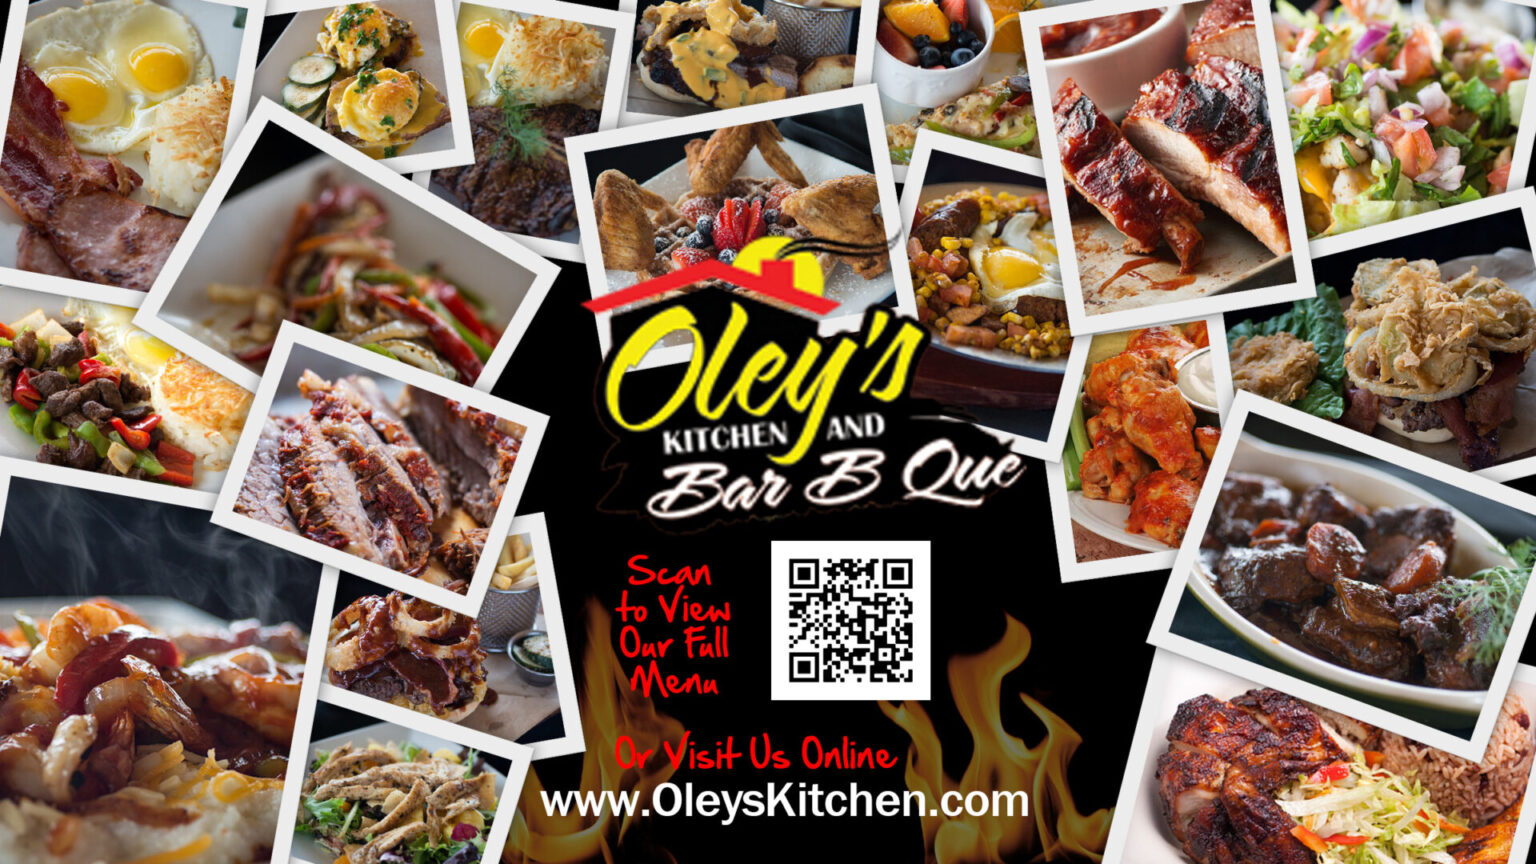 oley's kitchen and bar-b-que